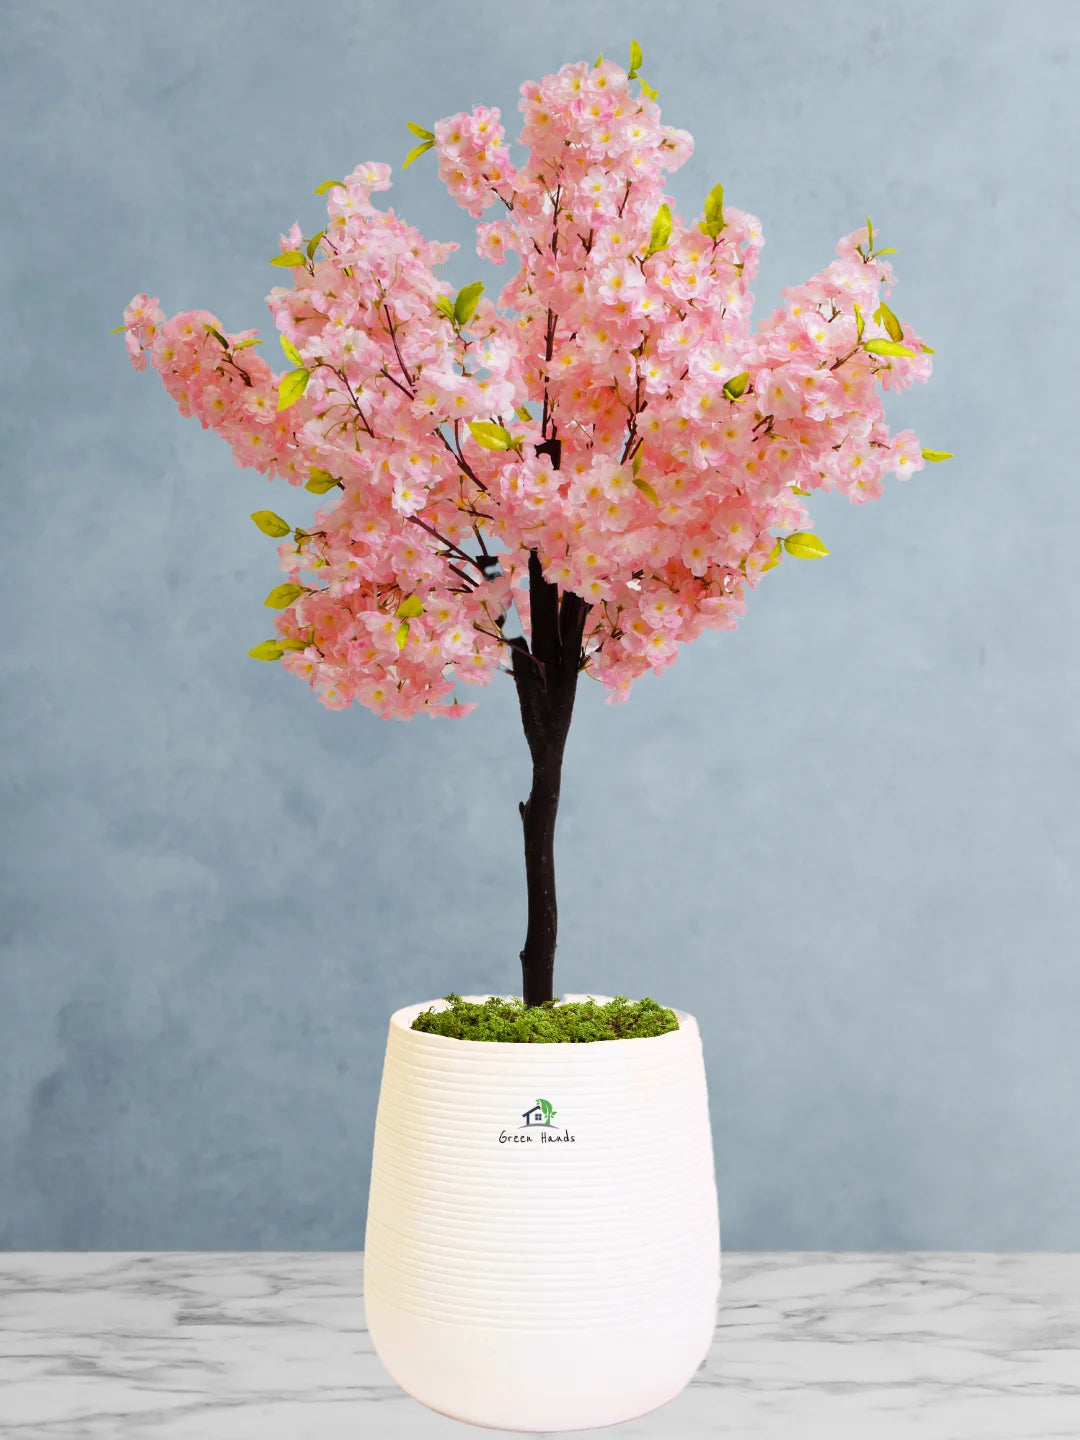 Exquisite Indoor Artificial Cherry Blossom Tree | XL Size 160-170cm | Perfect for Dubai, Abu Dhabi, UAE Homes & Offices